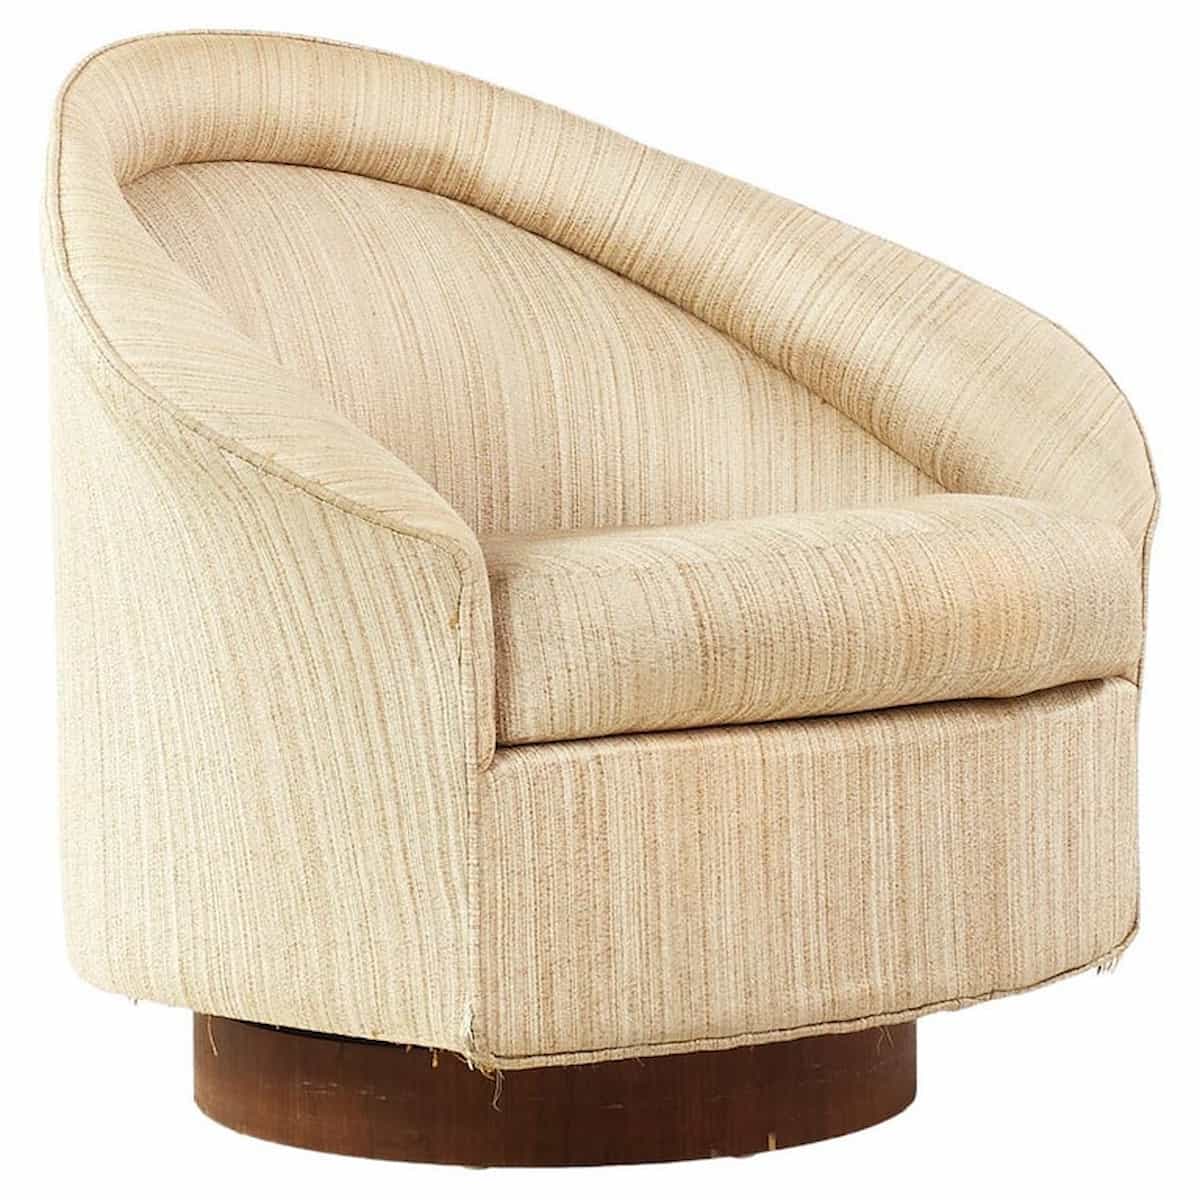 Adrian Pearsall for Craft Associates Mid Century Swivel Lounge Chair